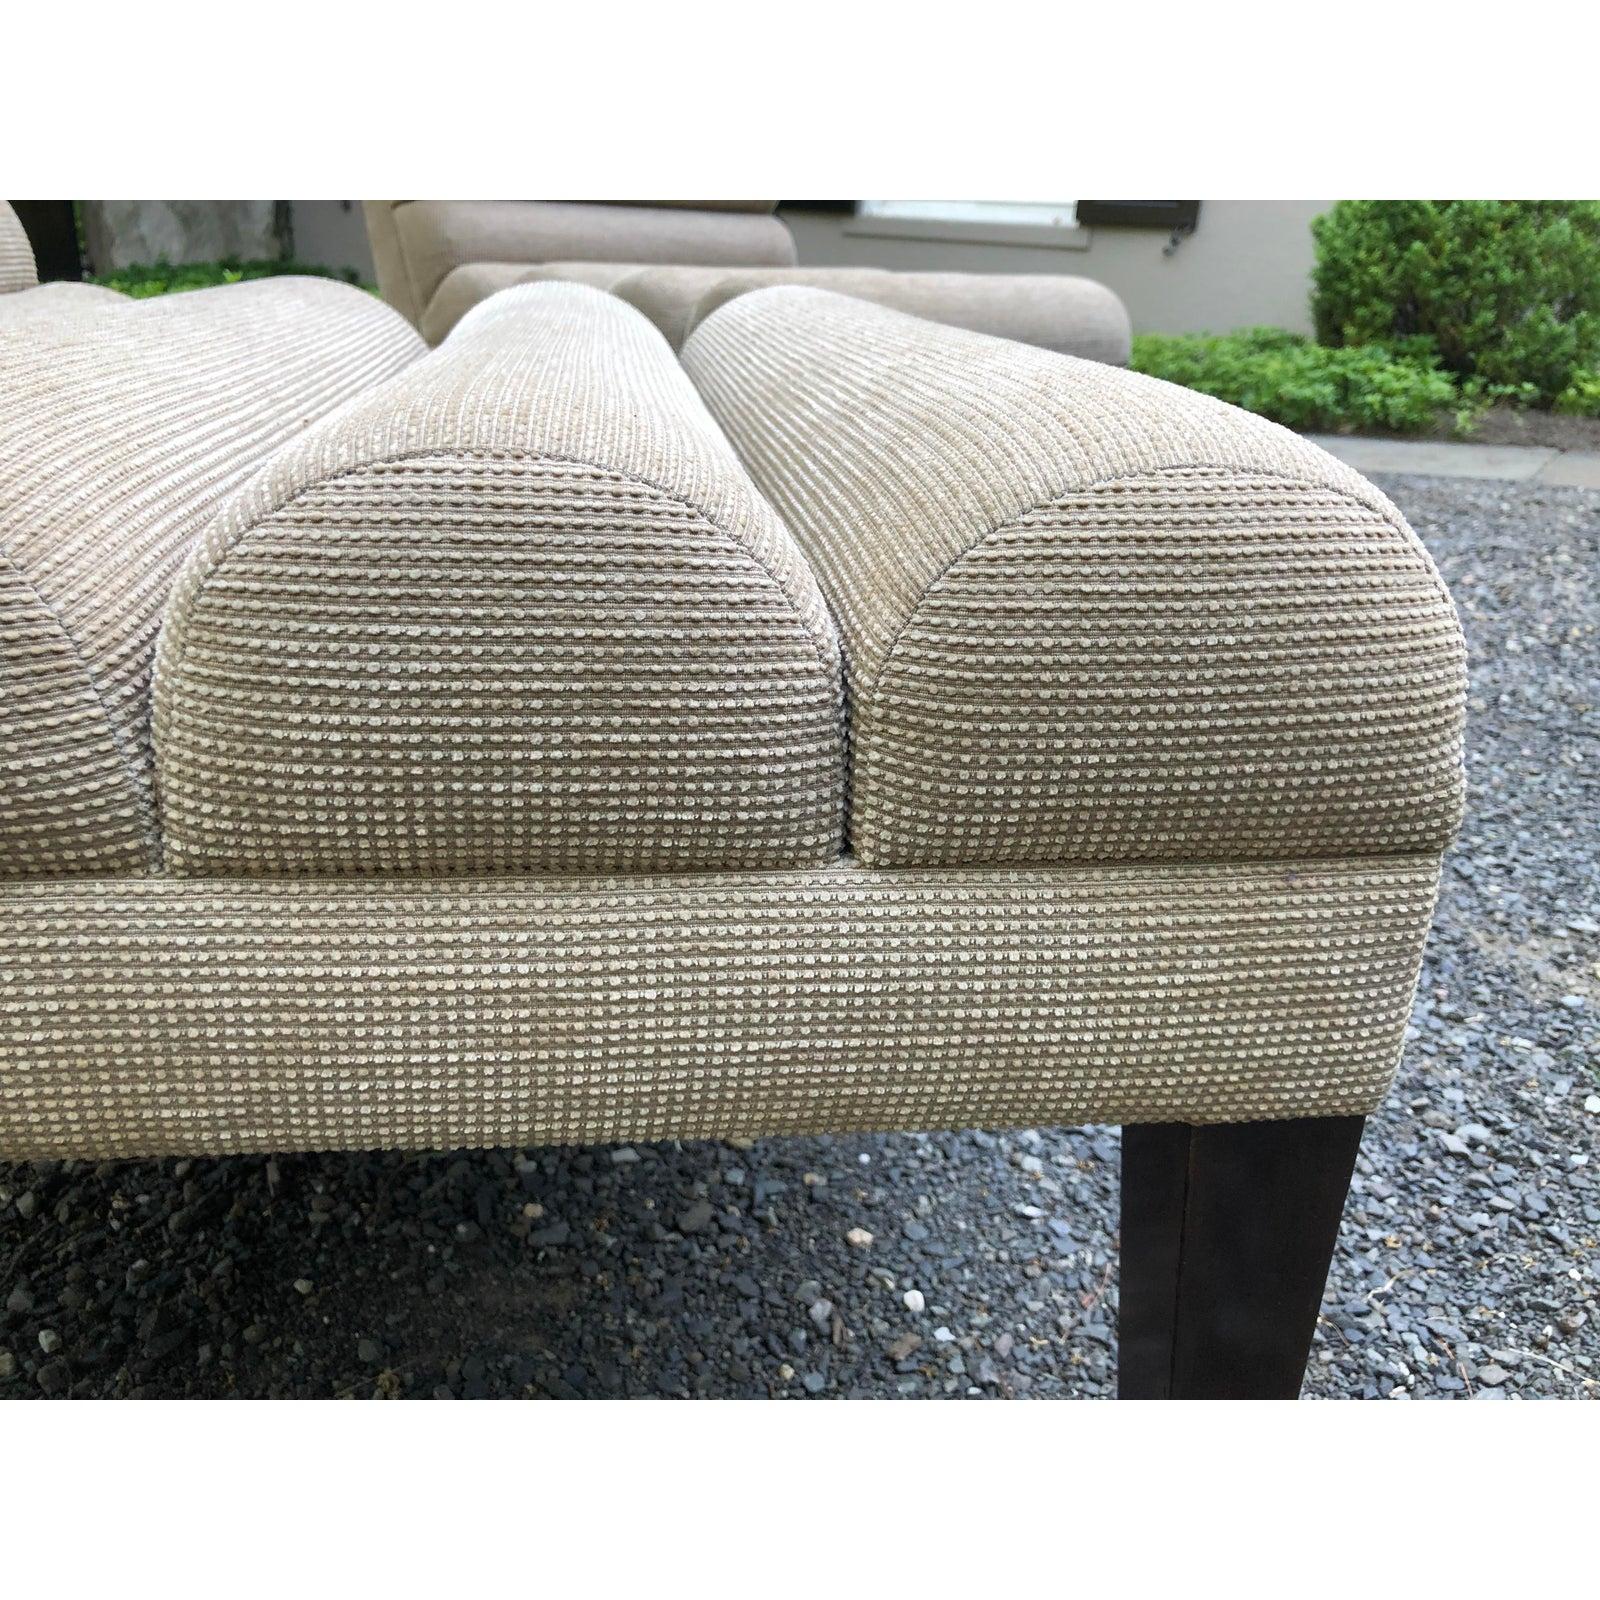 Upholstery Super Chic Pair of Mid-Century Modern Channel Back Slipper Chairs